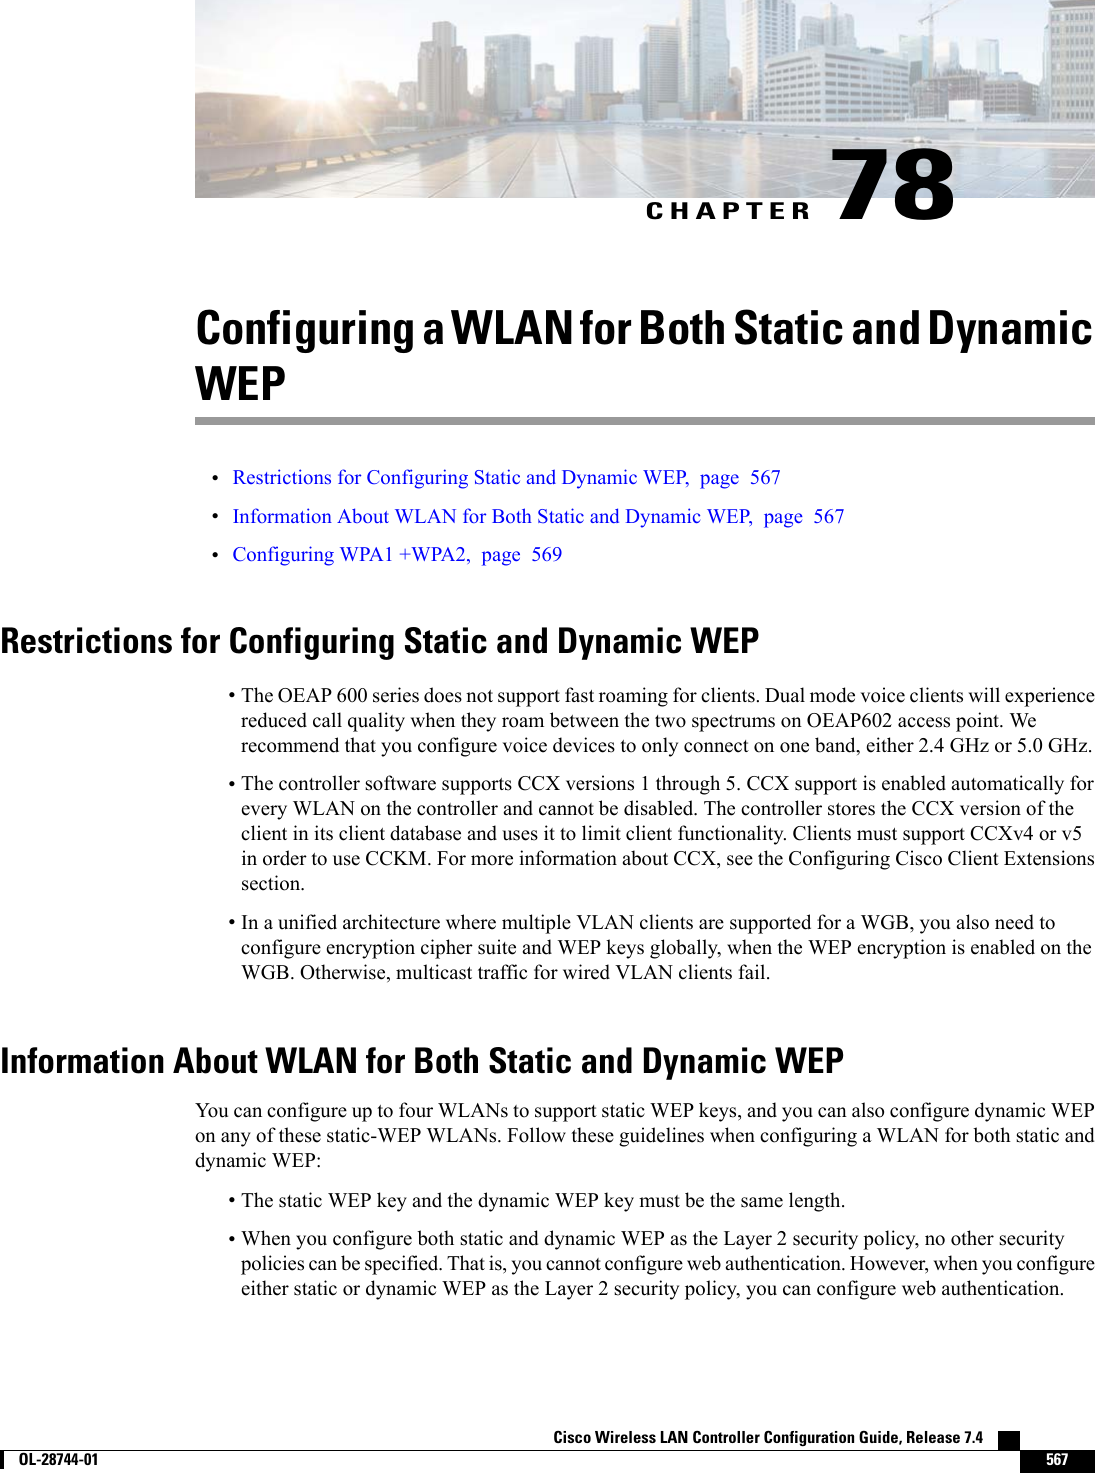 CHAPTER 78Configuring a WLAN for Both Static and DynamicWEP•Restrictions for Configuring Static and Dynamic WEP, page 567•Information About WLAN for Both Static and Dynamic WEP, page 567•Configuring WPA1 +WPA2, page 569Restrictions for Configuring Static and Dynamic WEP•The OEAP 600 series does not support fast roaming for clients. Dual mode voice clients will experiencereduced call quality when they roam between the two spectrums on OEAP602 access point. Werecommend that you configure voice devices to only connect on one band, either 2.4 GHz or 5.0 GHz.•The controller software supports CCX versions 1 through 5. CCX support is enabled automatically forevery WLAN on the controller and cannot be disabled. The controller stores the CCX version of theclient in its client database and uses it to limit client functionality. Clients must support CCXv4 or v5in order to use CCKM. For more information about CCX, see the Configuring Cisco Client Extensionssection.•In a unified architecture where multiple VLAN clients are supported for a WGB, you also need toconfigure encryption cipher suite and WEP keys globally, when the WEP encryption is enabled on theWGB. Otherwise, multicast traffic for wired VLAN clients fail.Information About WLAN for Both Static and Dynamic WEPYou can configure up to four WLANs to support static WEP keys, and you can also configure dynamic WEPon any of these static-WEP WLANs. Follow these guidelines when configuring a WLAN for both static anddynamic WEP:•The static WEP key and the dynamic WEP key must be the same length.•When you configure both static and dynamic WEP as the Layer 2 security policy, no other securitypolicies can be specified. That is, you cannot configure web authentication. However, when you configureeither static or dynamic WEP as the Layer 2 security policy, you can configure web authentication.Cisco Wireless LAN Controller Configuration Guide, Release 7.4        OL-28744-01 567